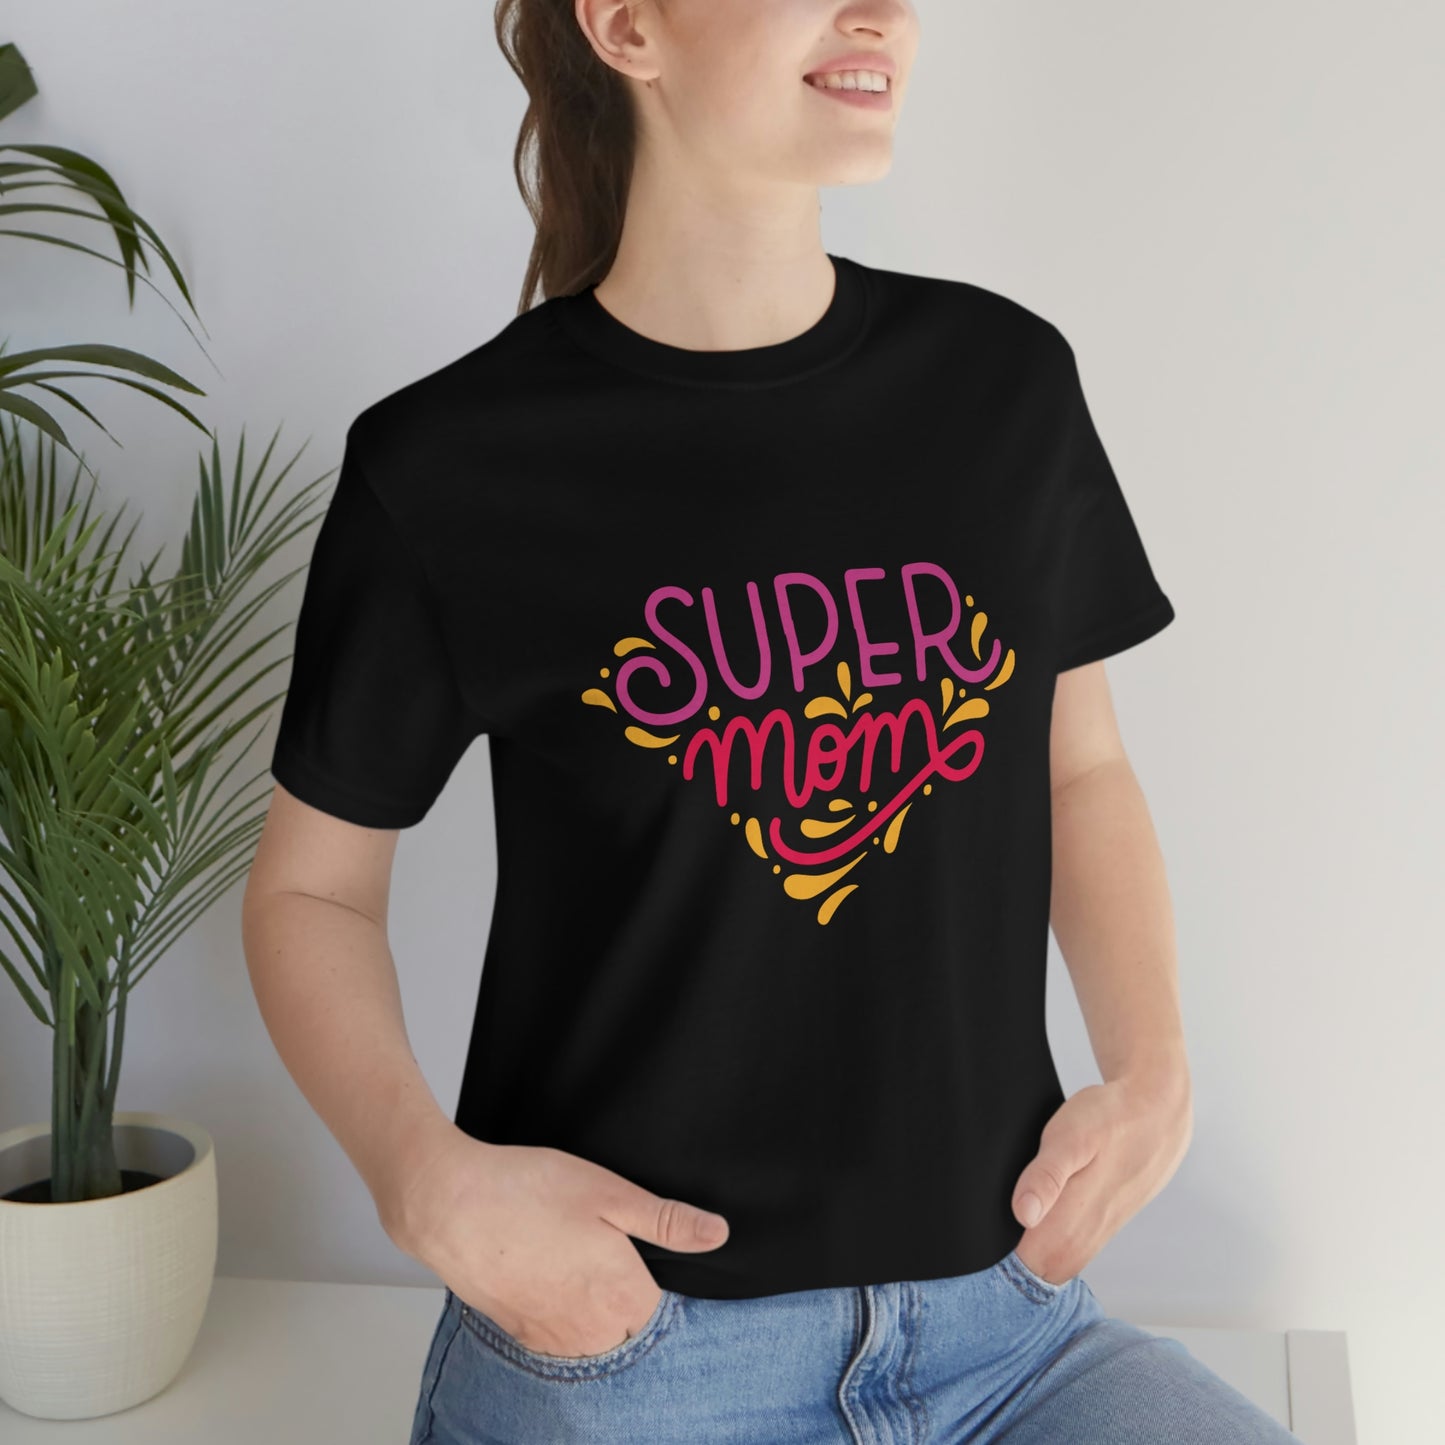 Super lovable design for the perfect Mothersday gift. Super mom black T-shirt is carefully crafted with high-quality materials, is both comfortable and durable, making it a versatile addition to any mom's wardrobe.